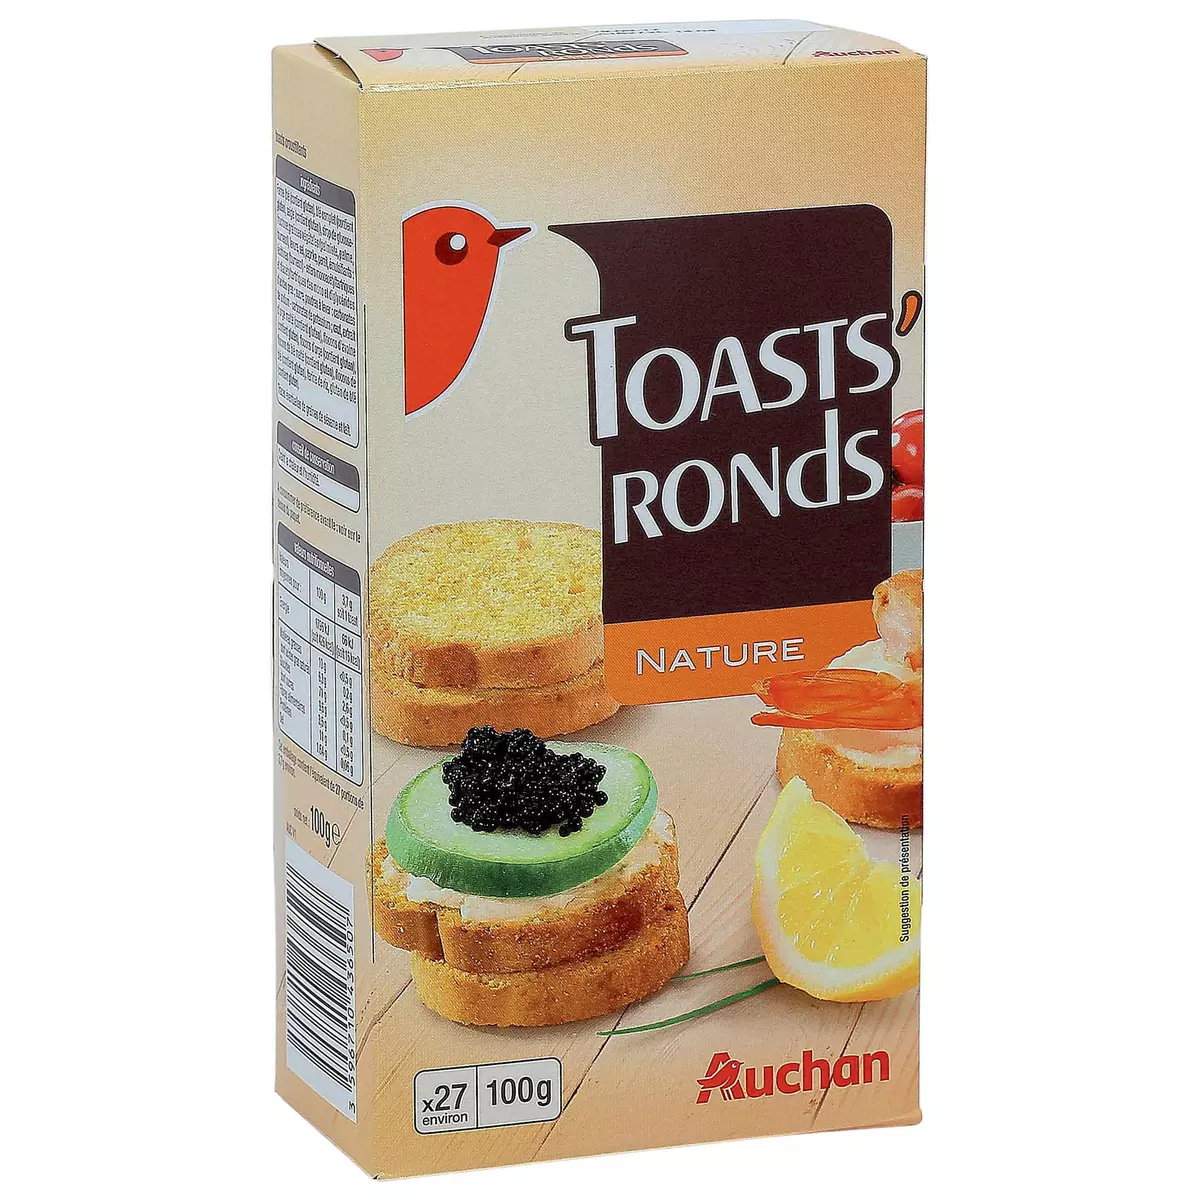 AUCHAN Toasts ronds nature 27 toasts 100g